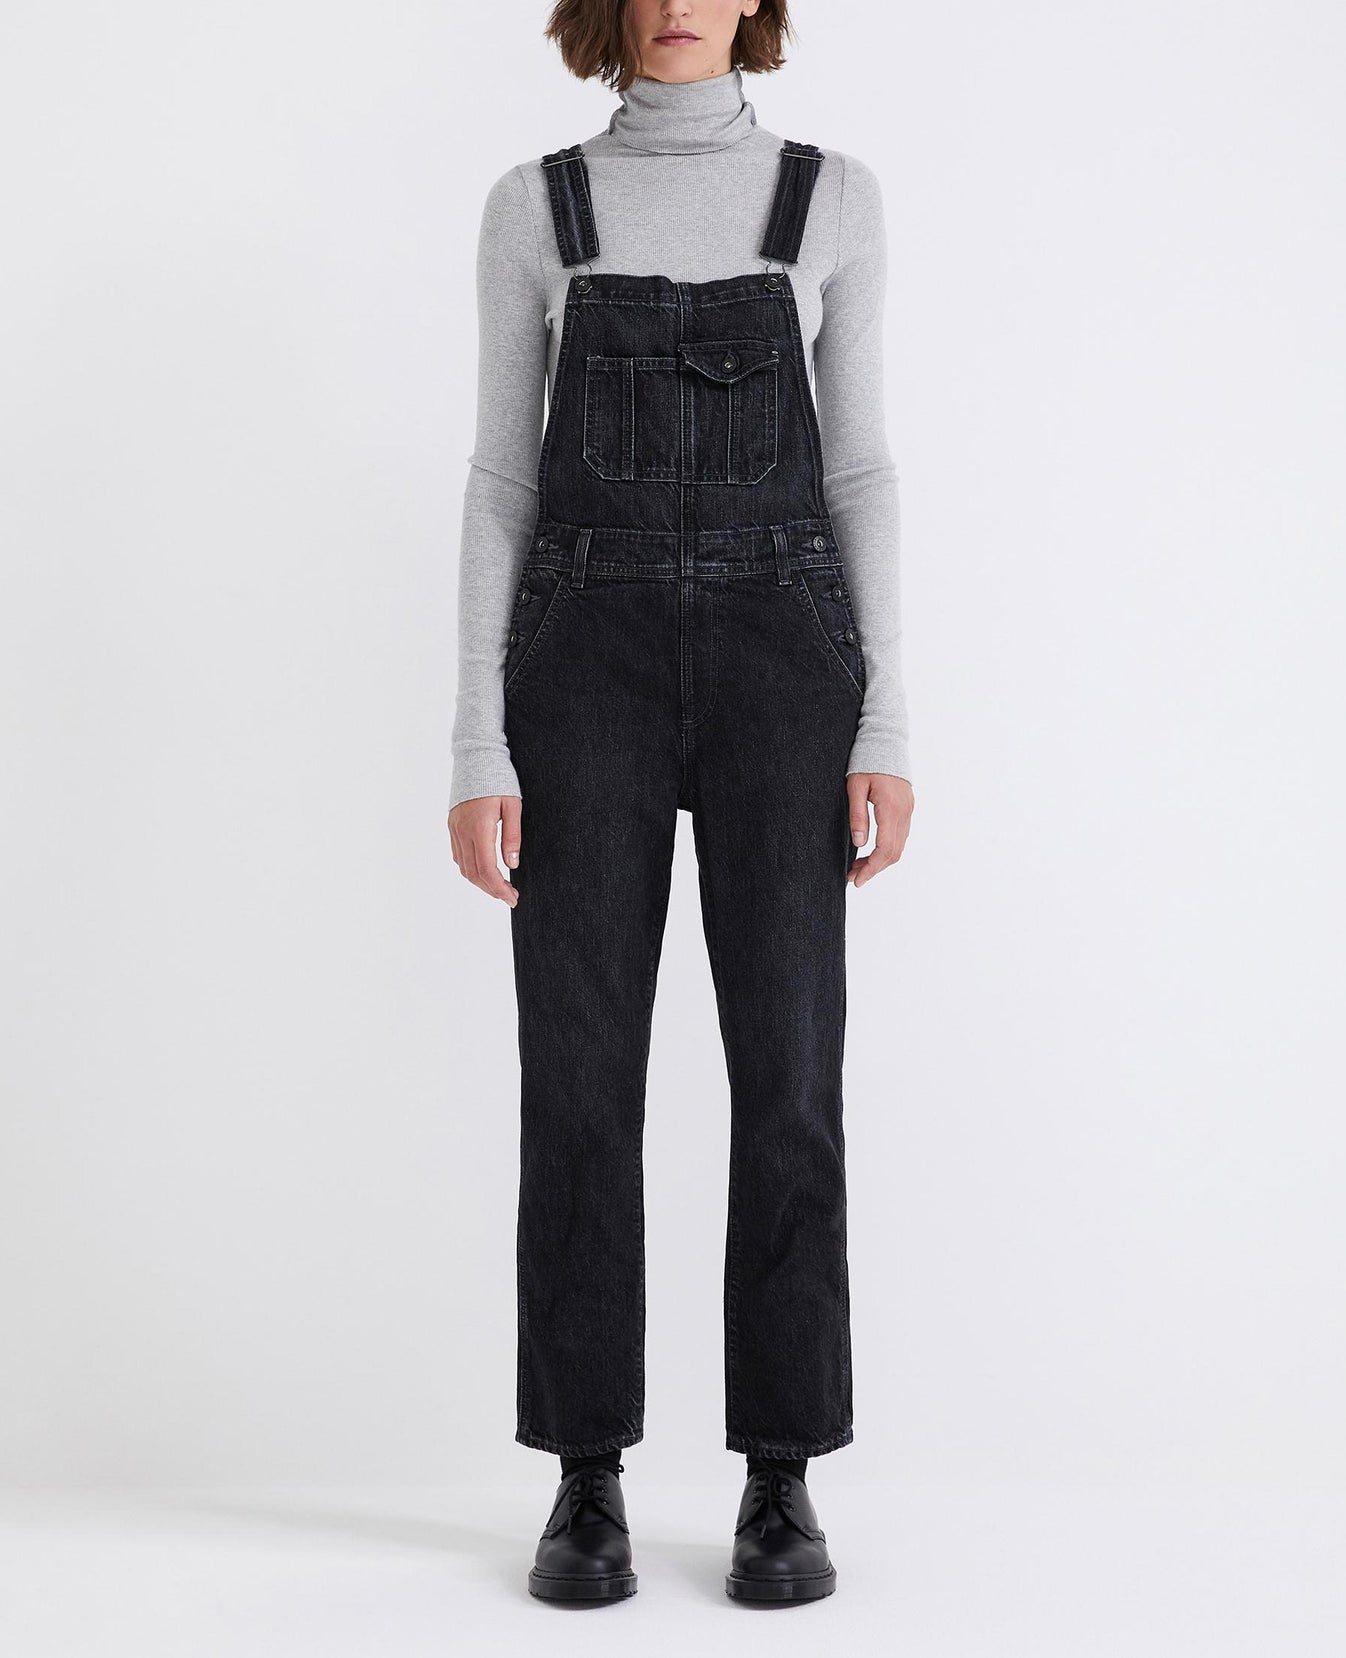 Leah Overall Obscura Overall Women Onepiece Photo 1